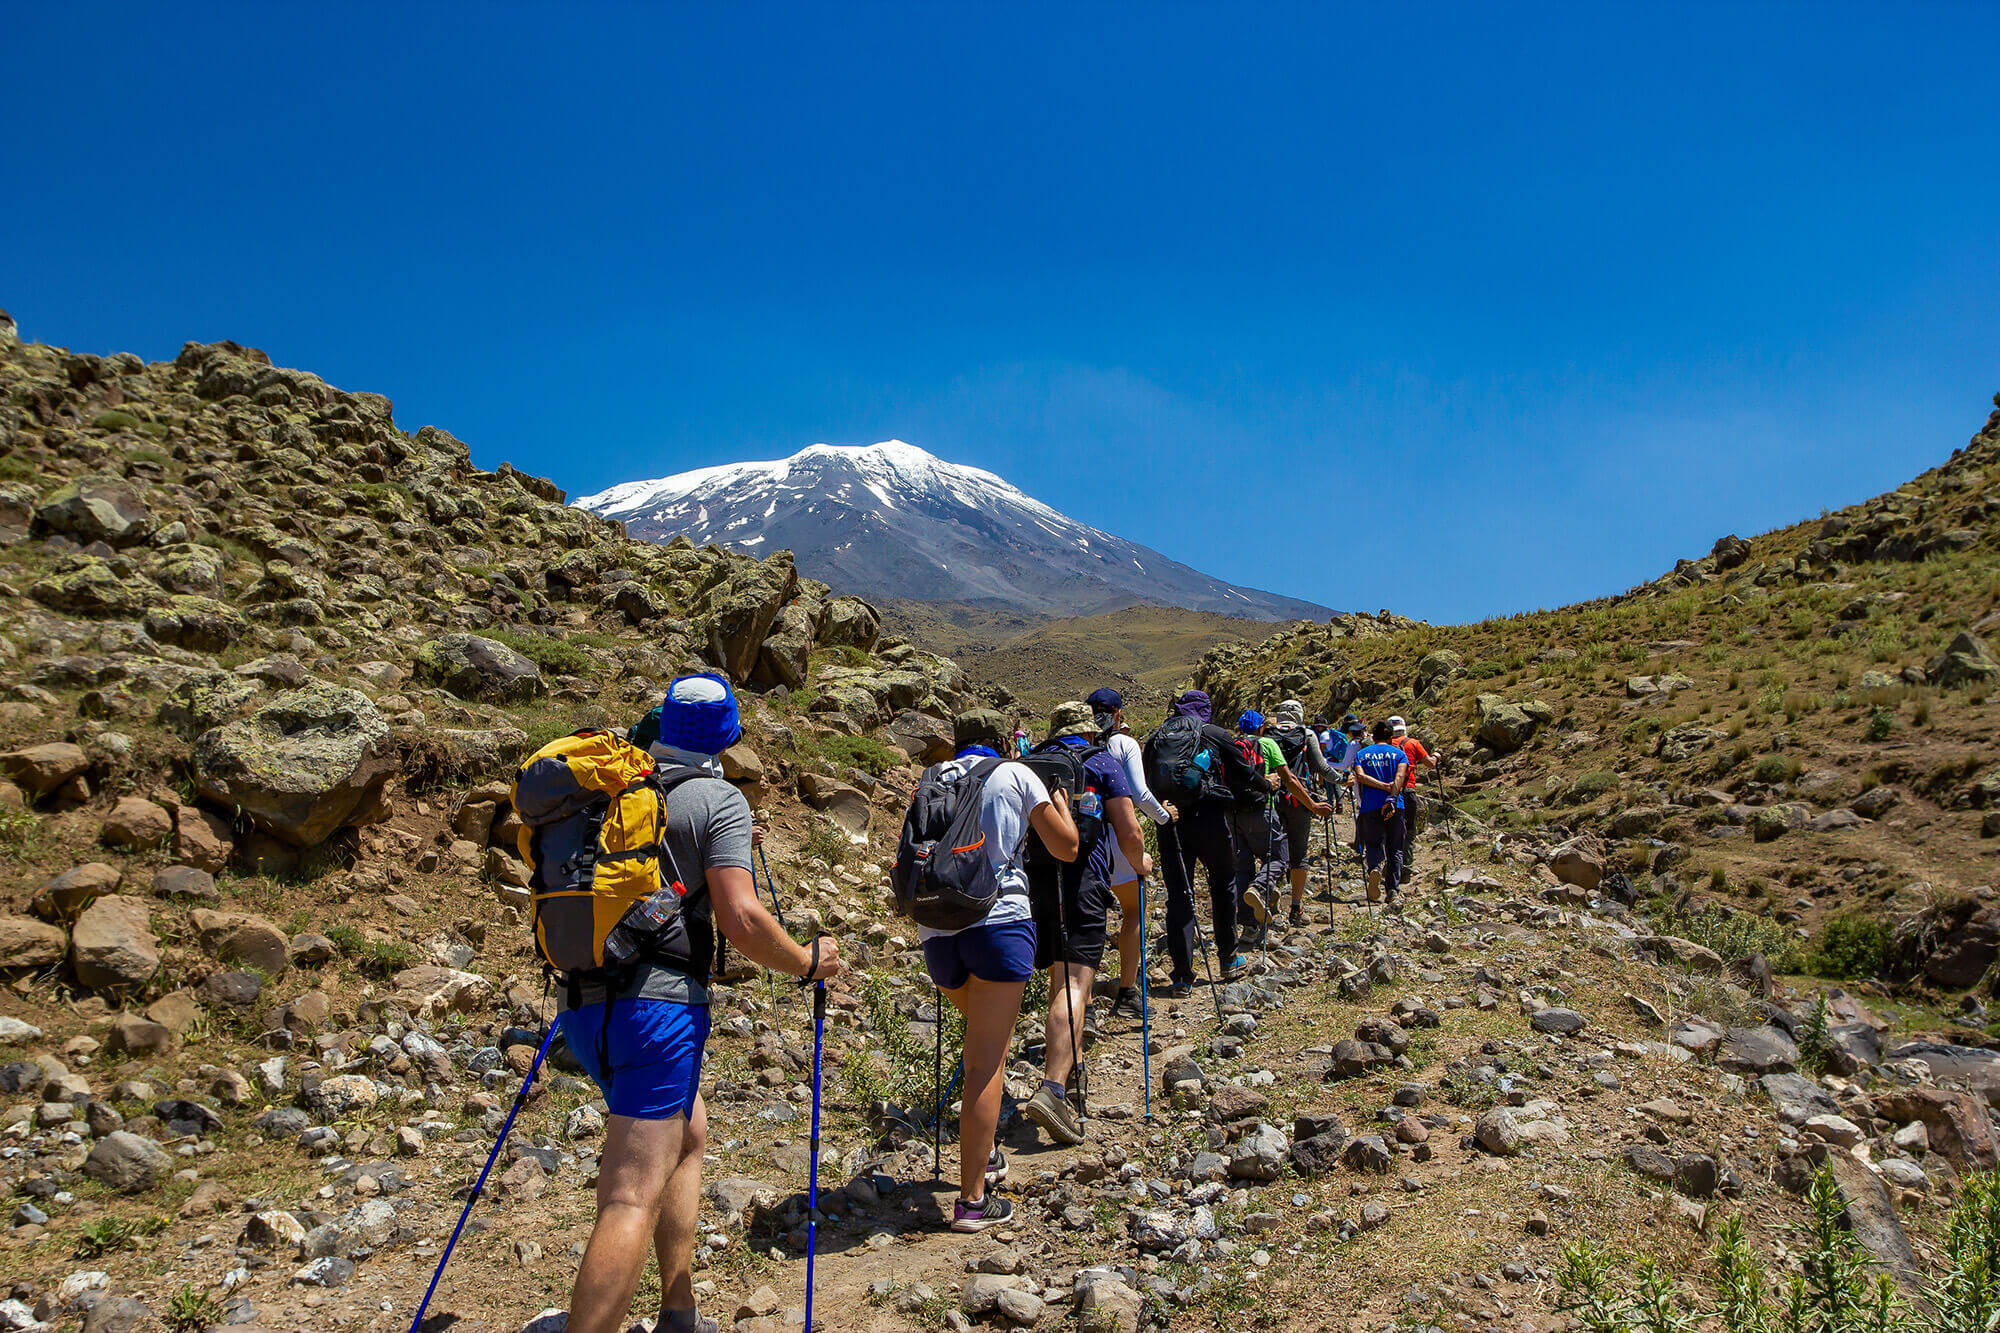 A Picture-Perfect Ascent on Mount Ararat